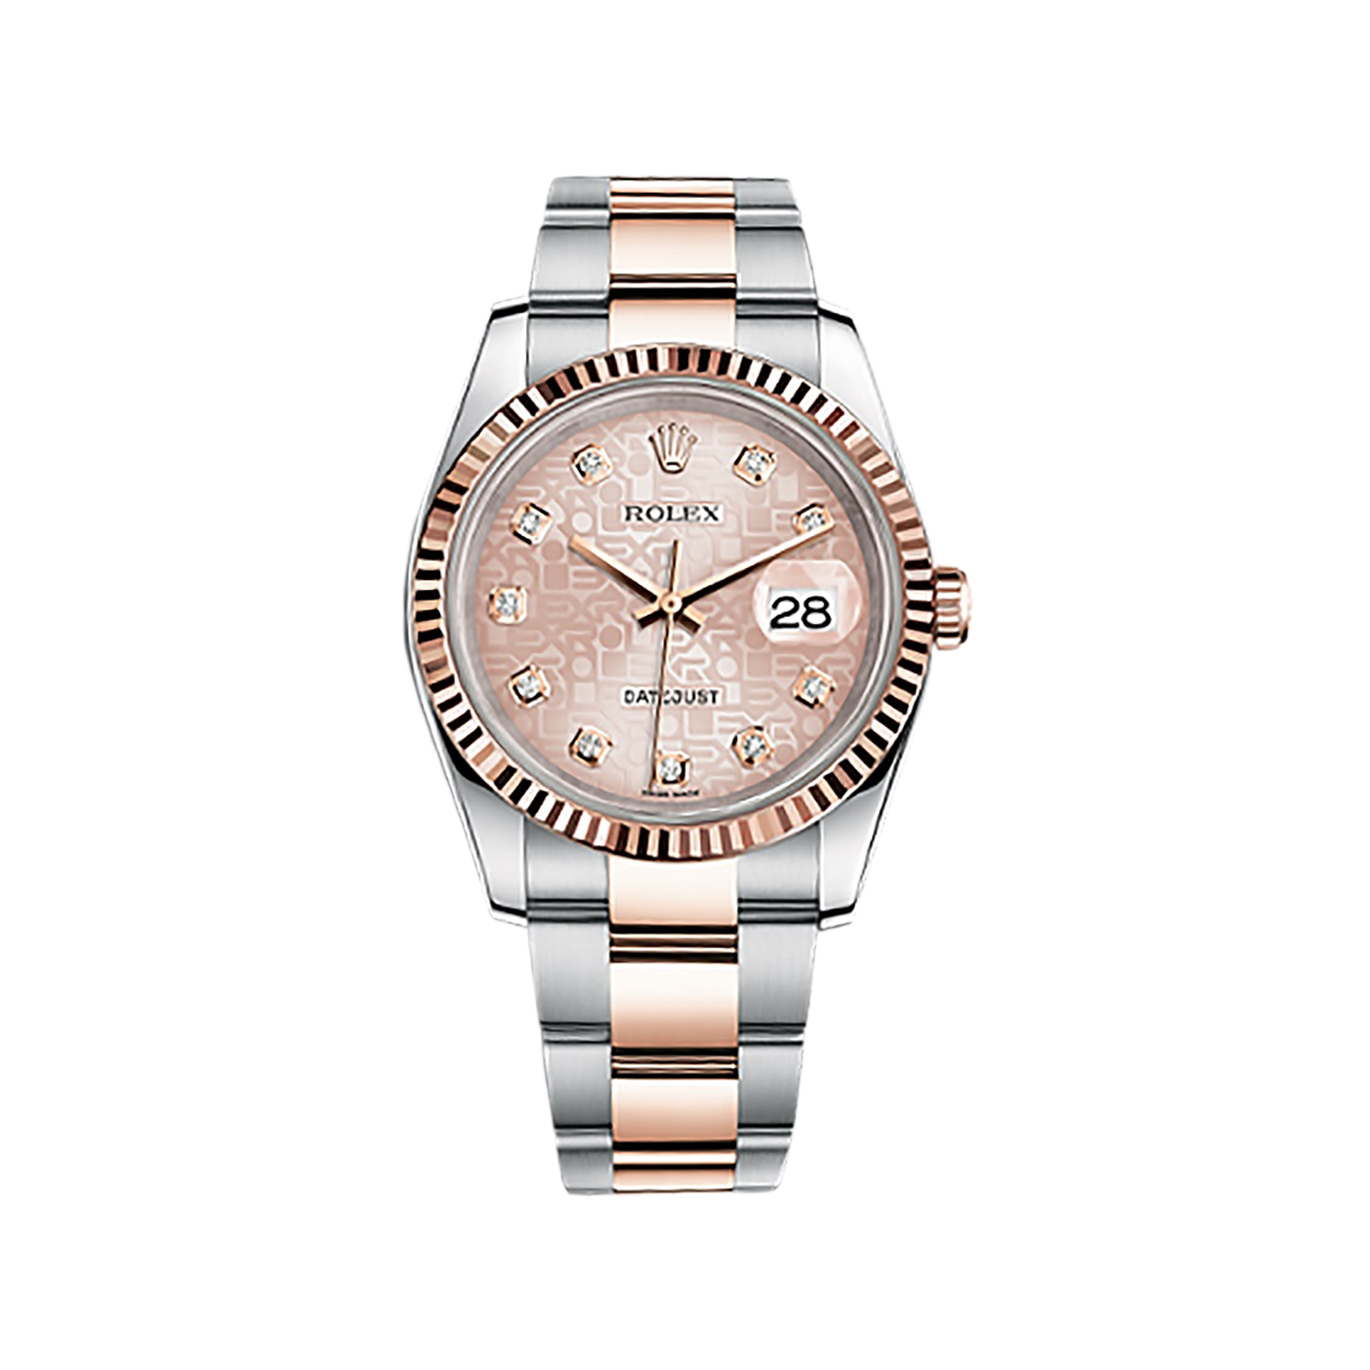 Datejust 36 116231 Rose Gold & Stainless Steel Watch (Pink Jubilee Design Set with Diamonds) - Click Image to Close